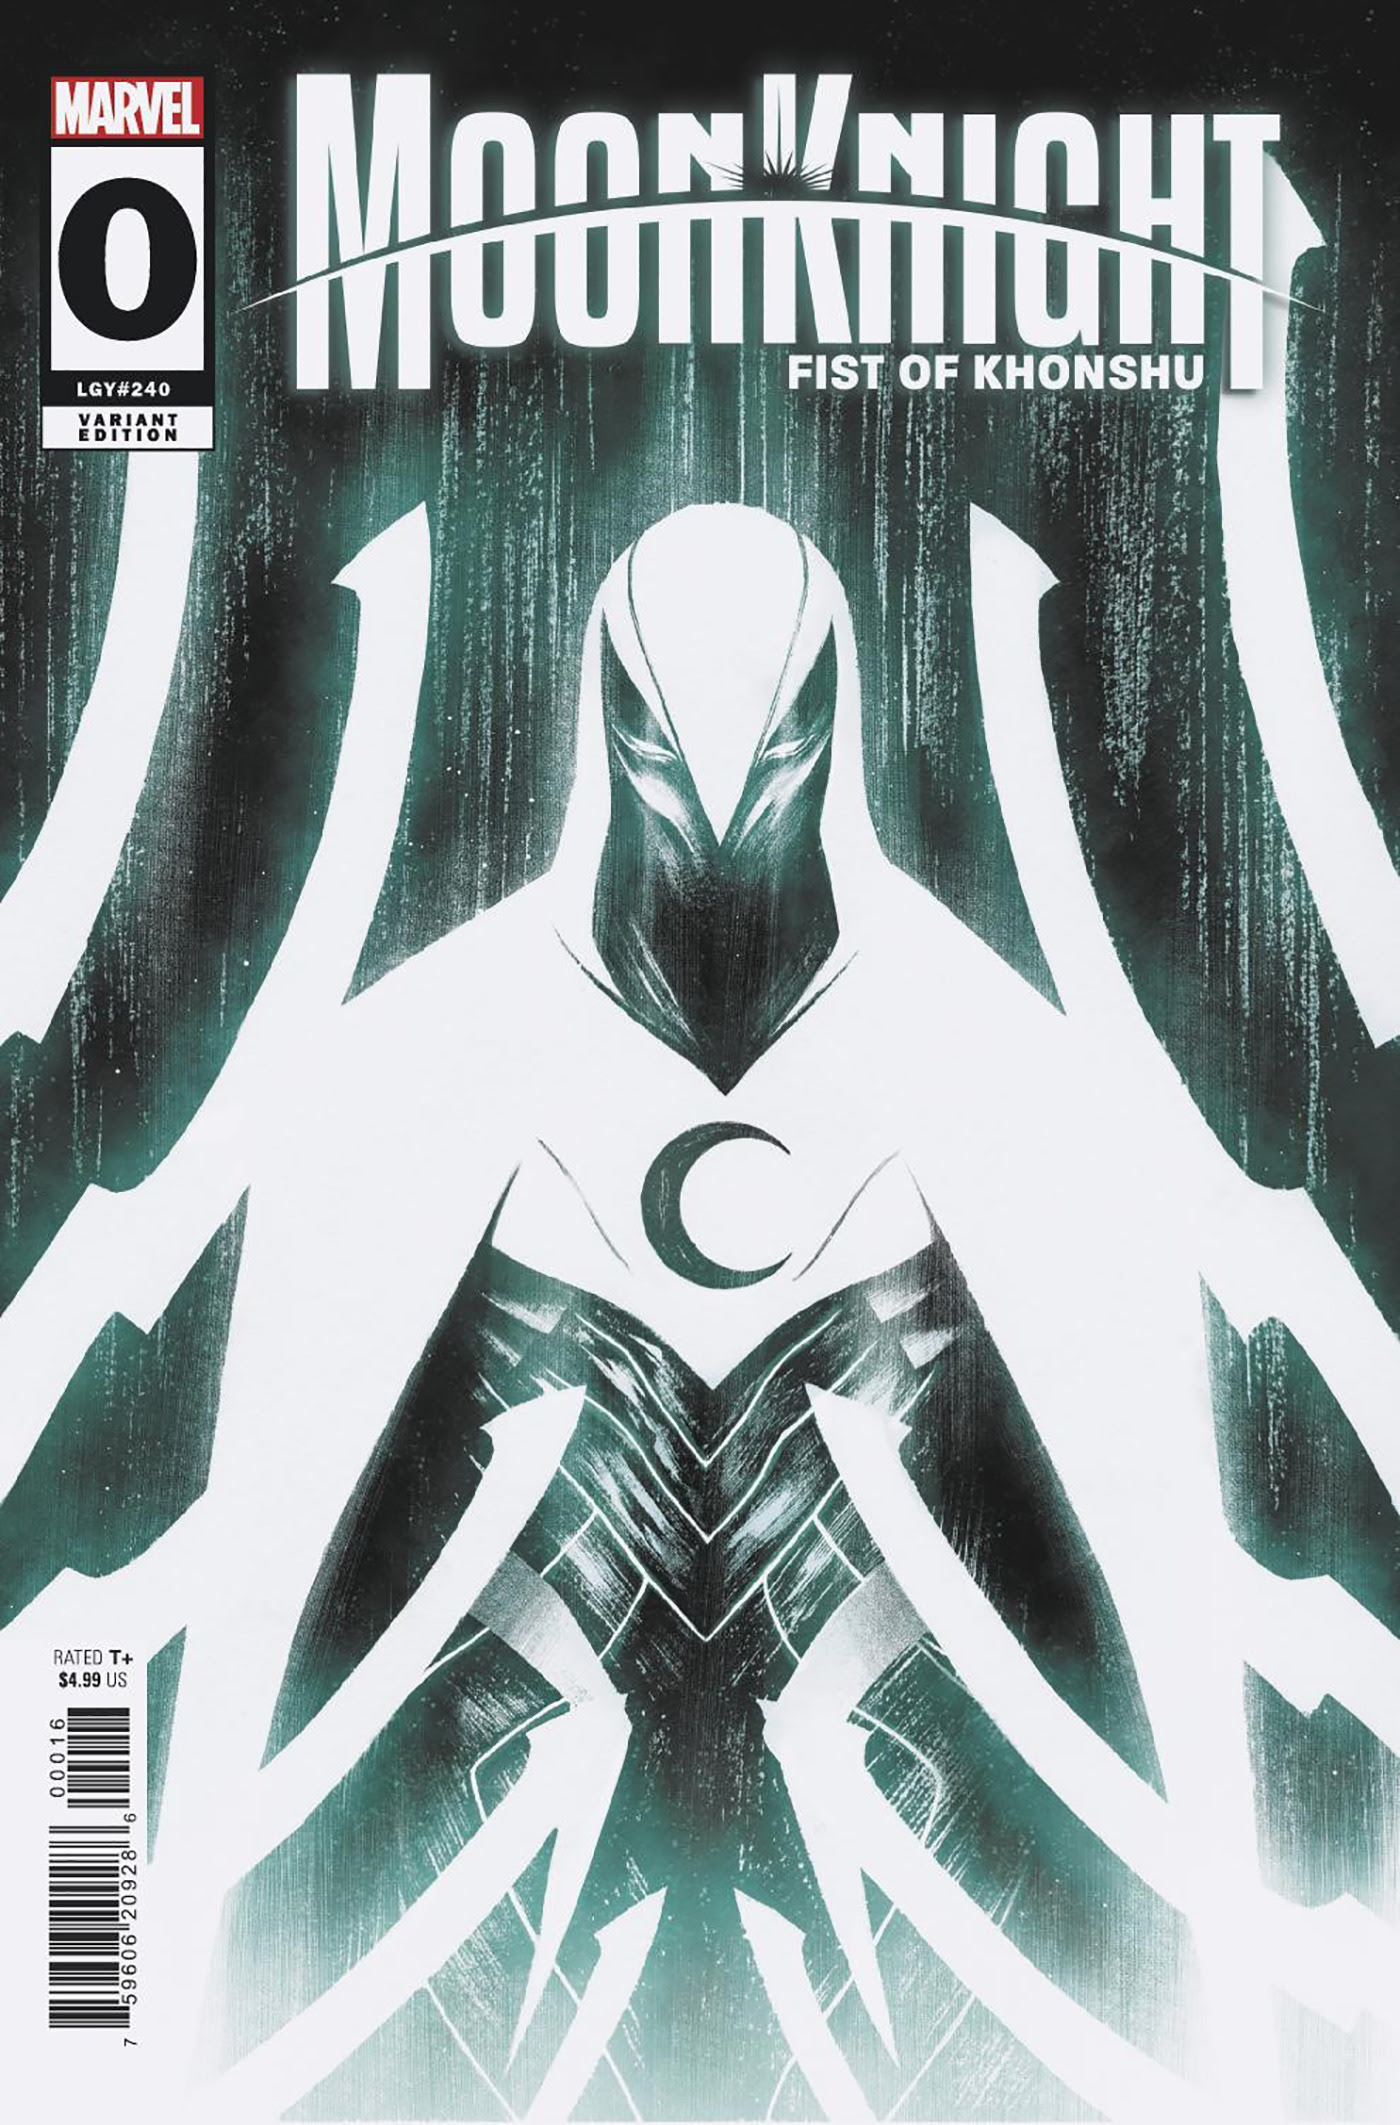 Moon Knight: Fist of Khonshu #0 Surprise Promotional Variant